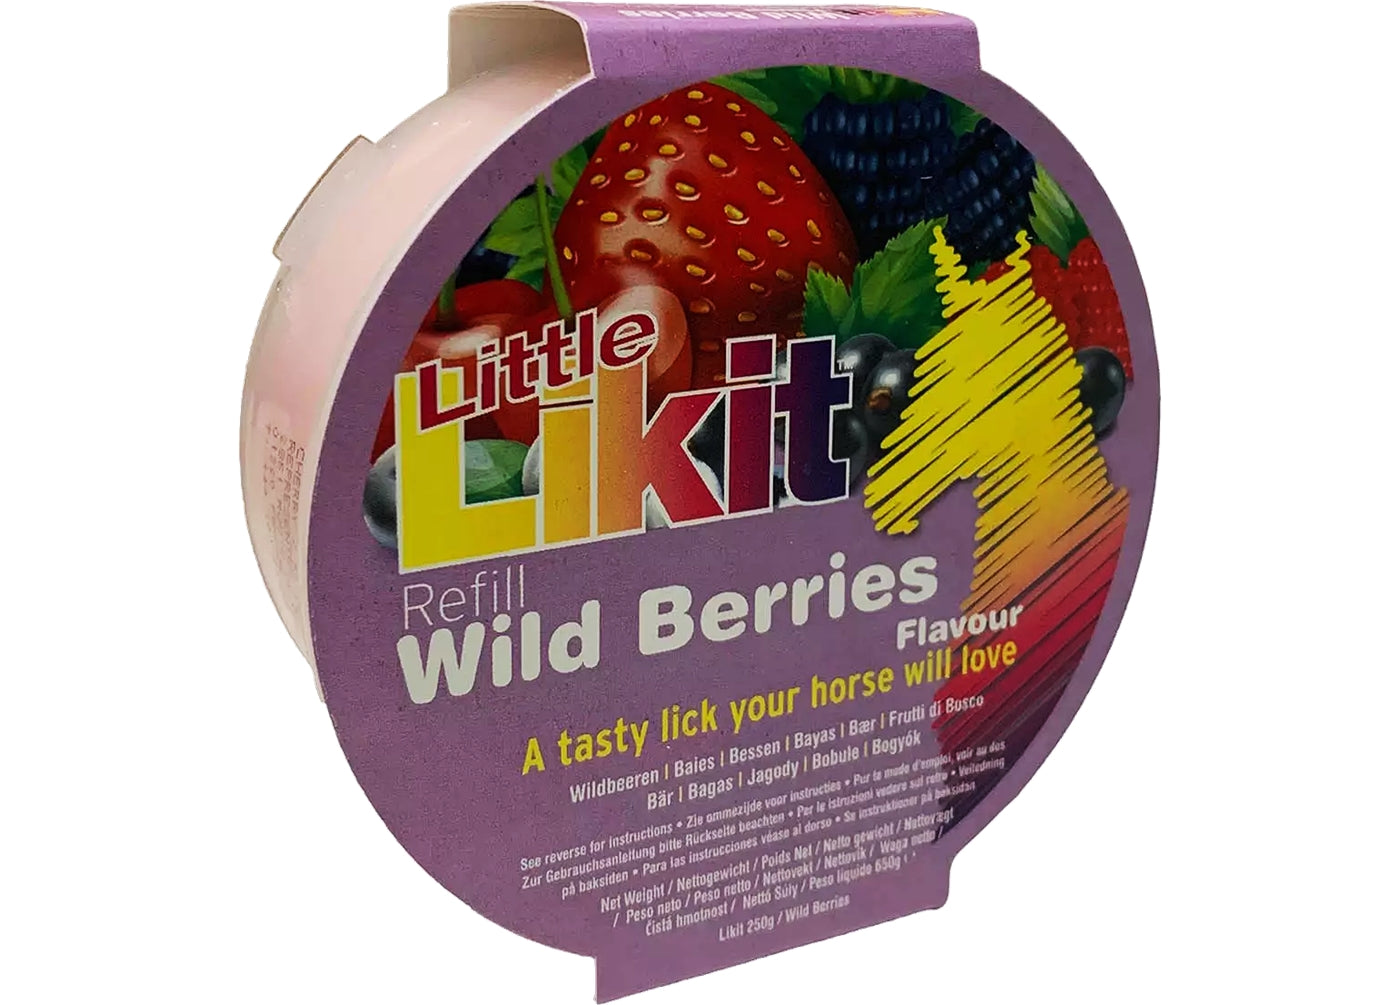 Little Likit - Wild Berries Flavour Horse Treat - 250g